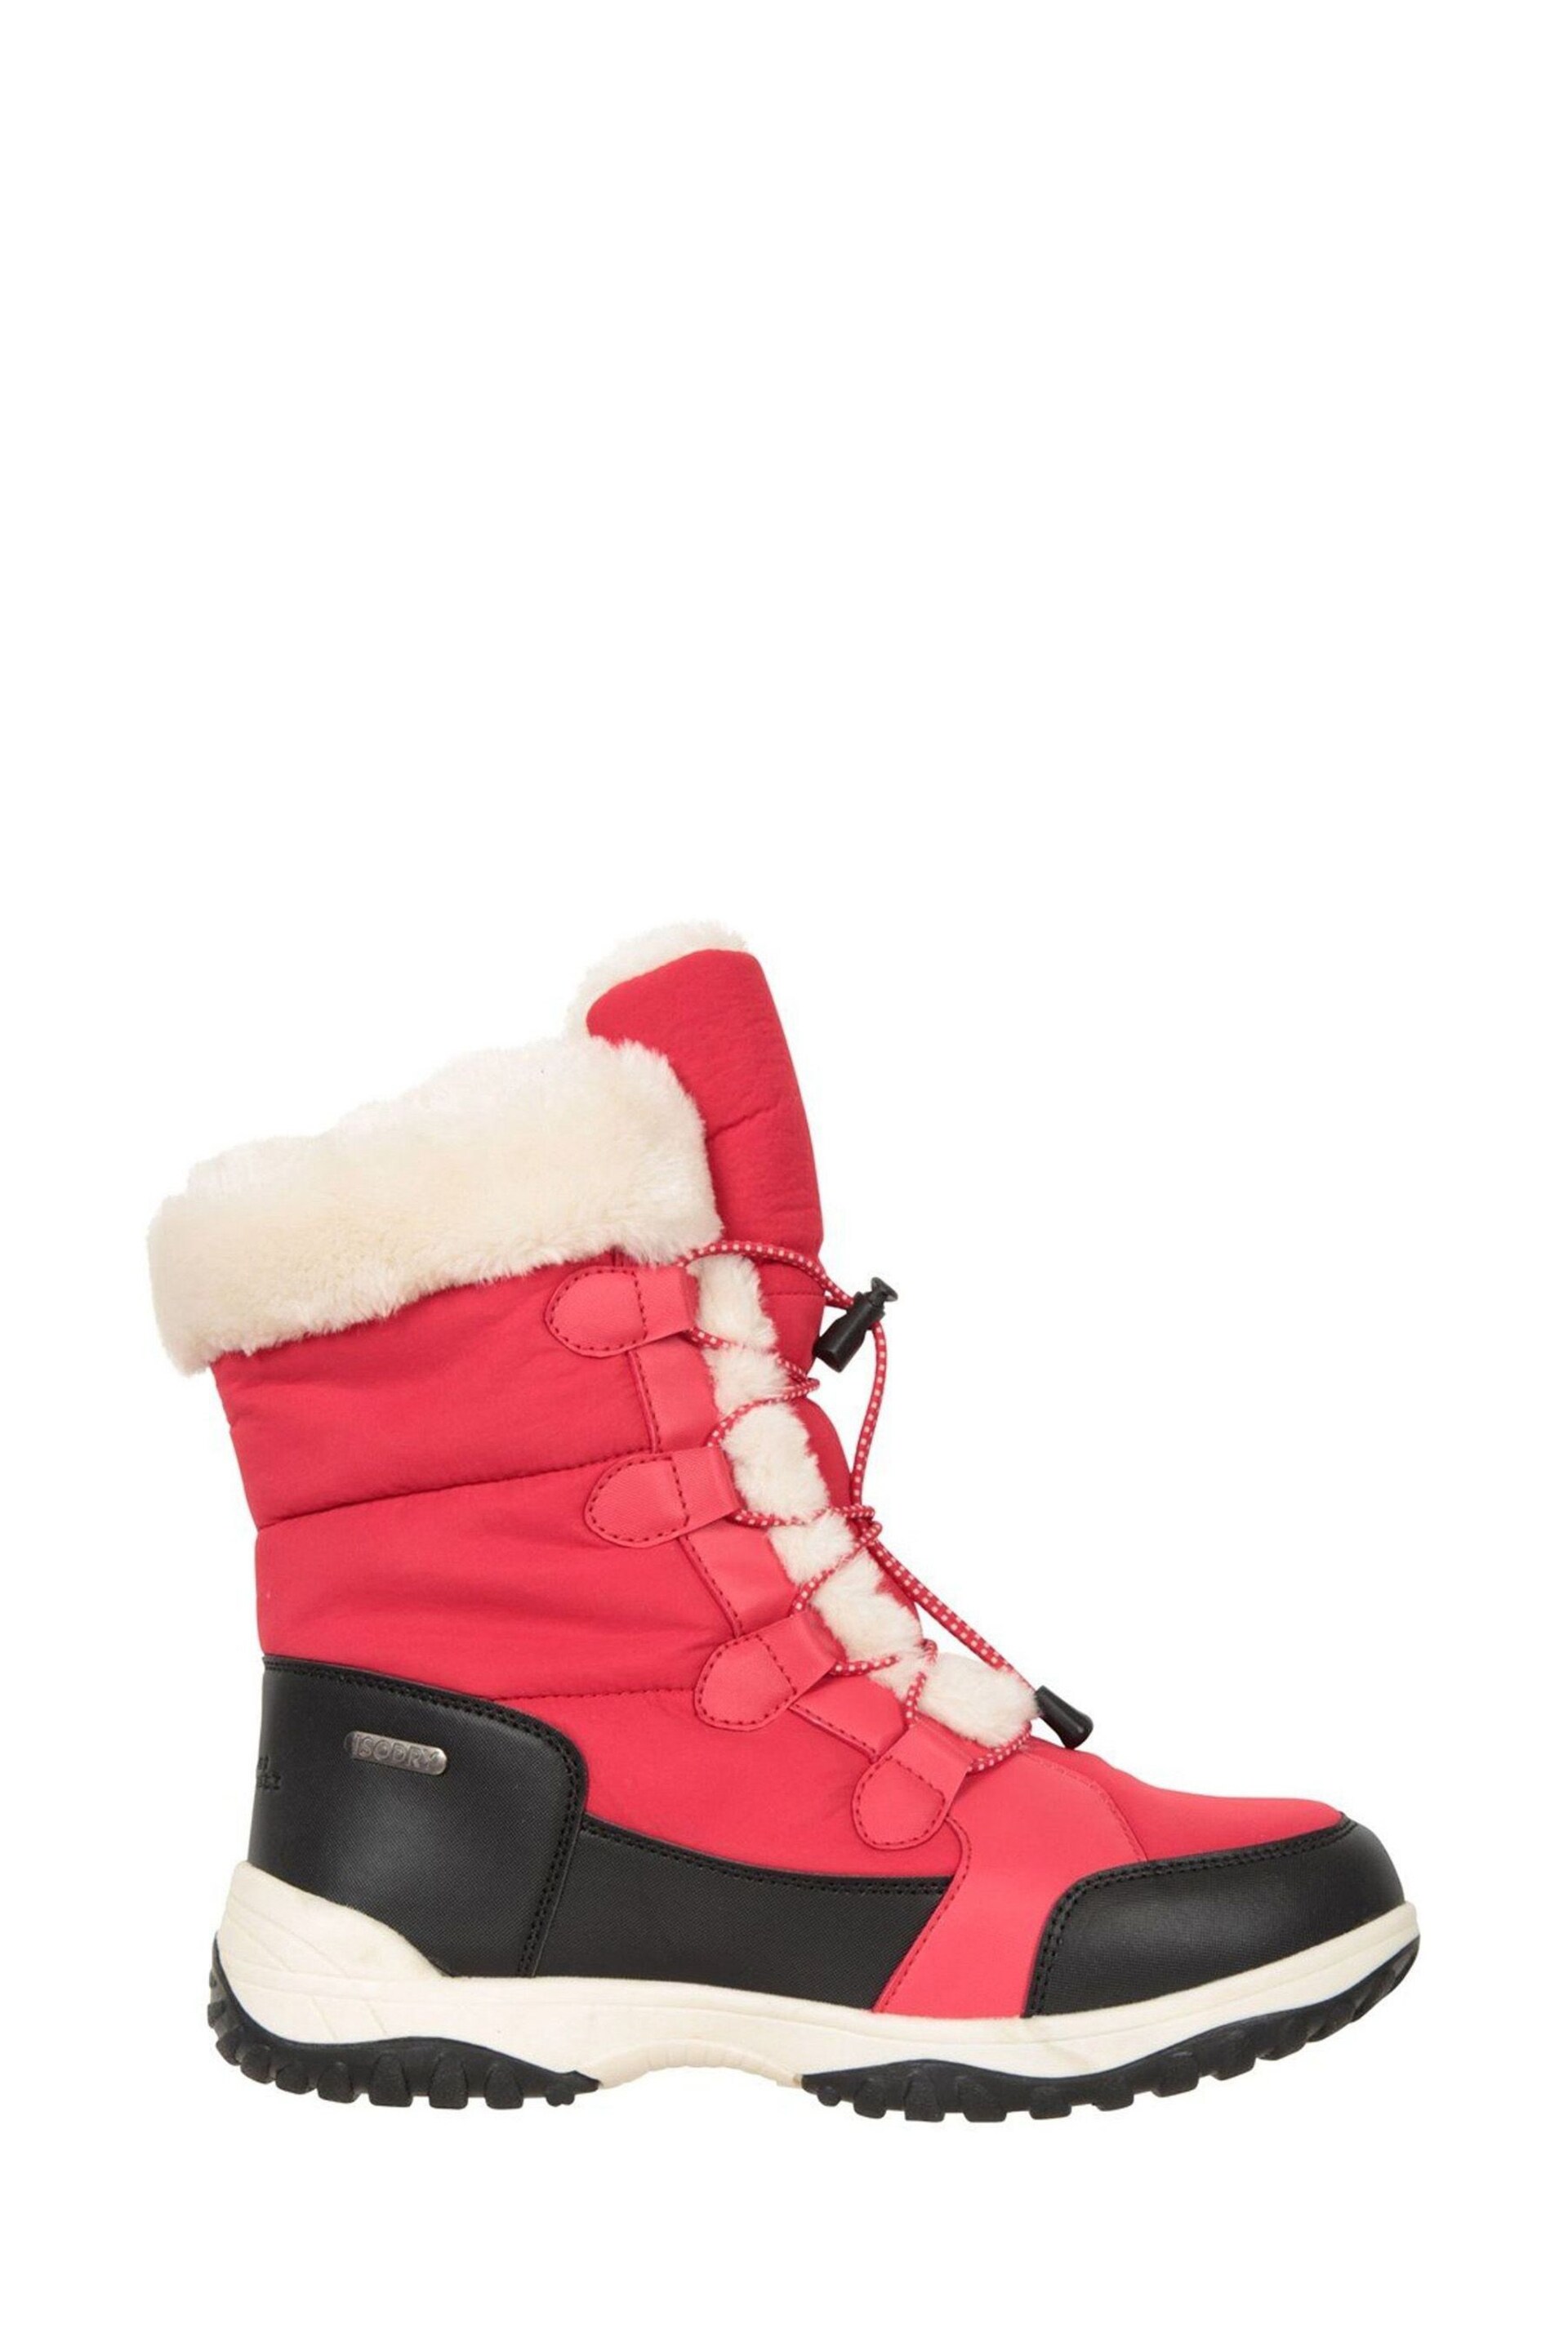 Mountain Warehouse Red Snowflake Snow Boots - Image 2 of 3